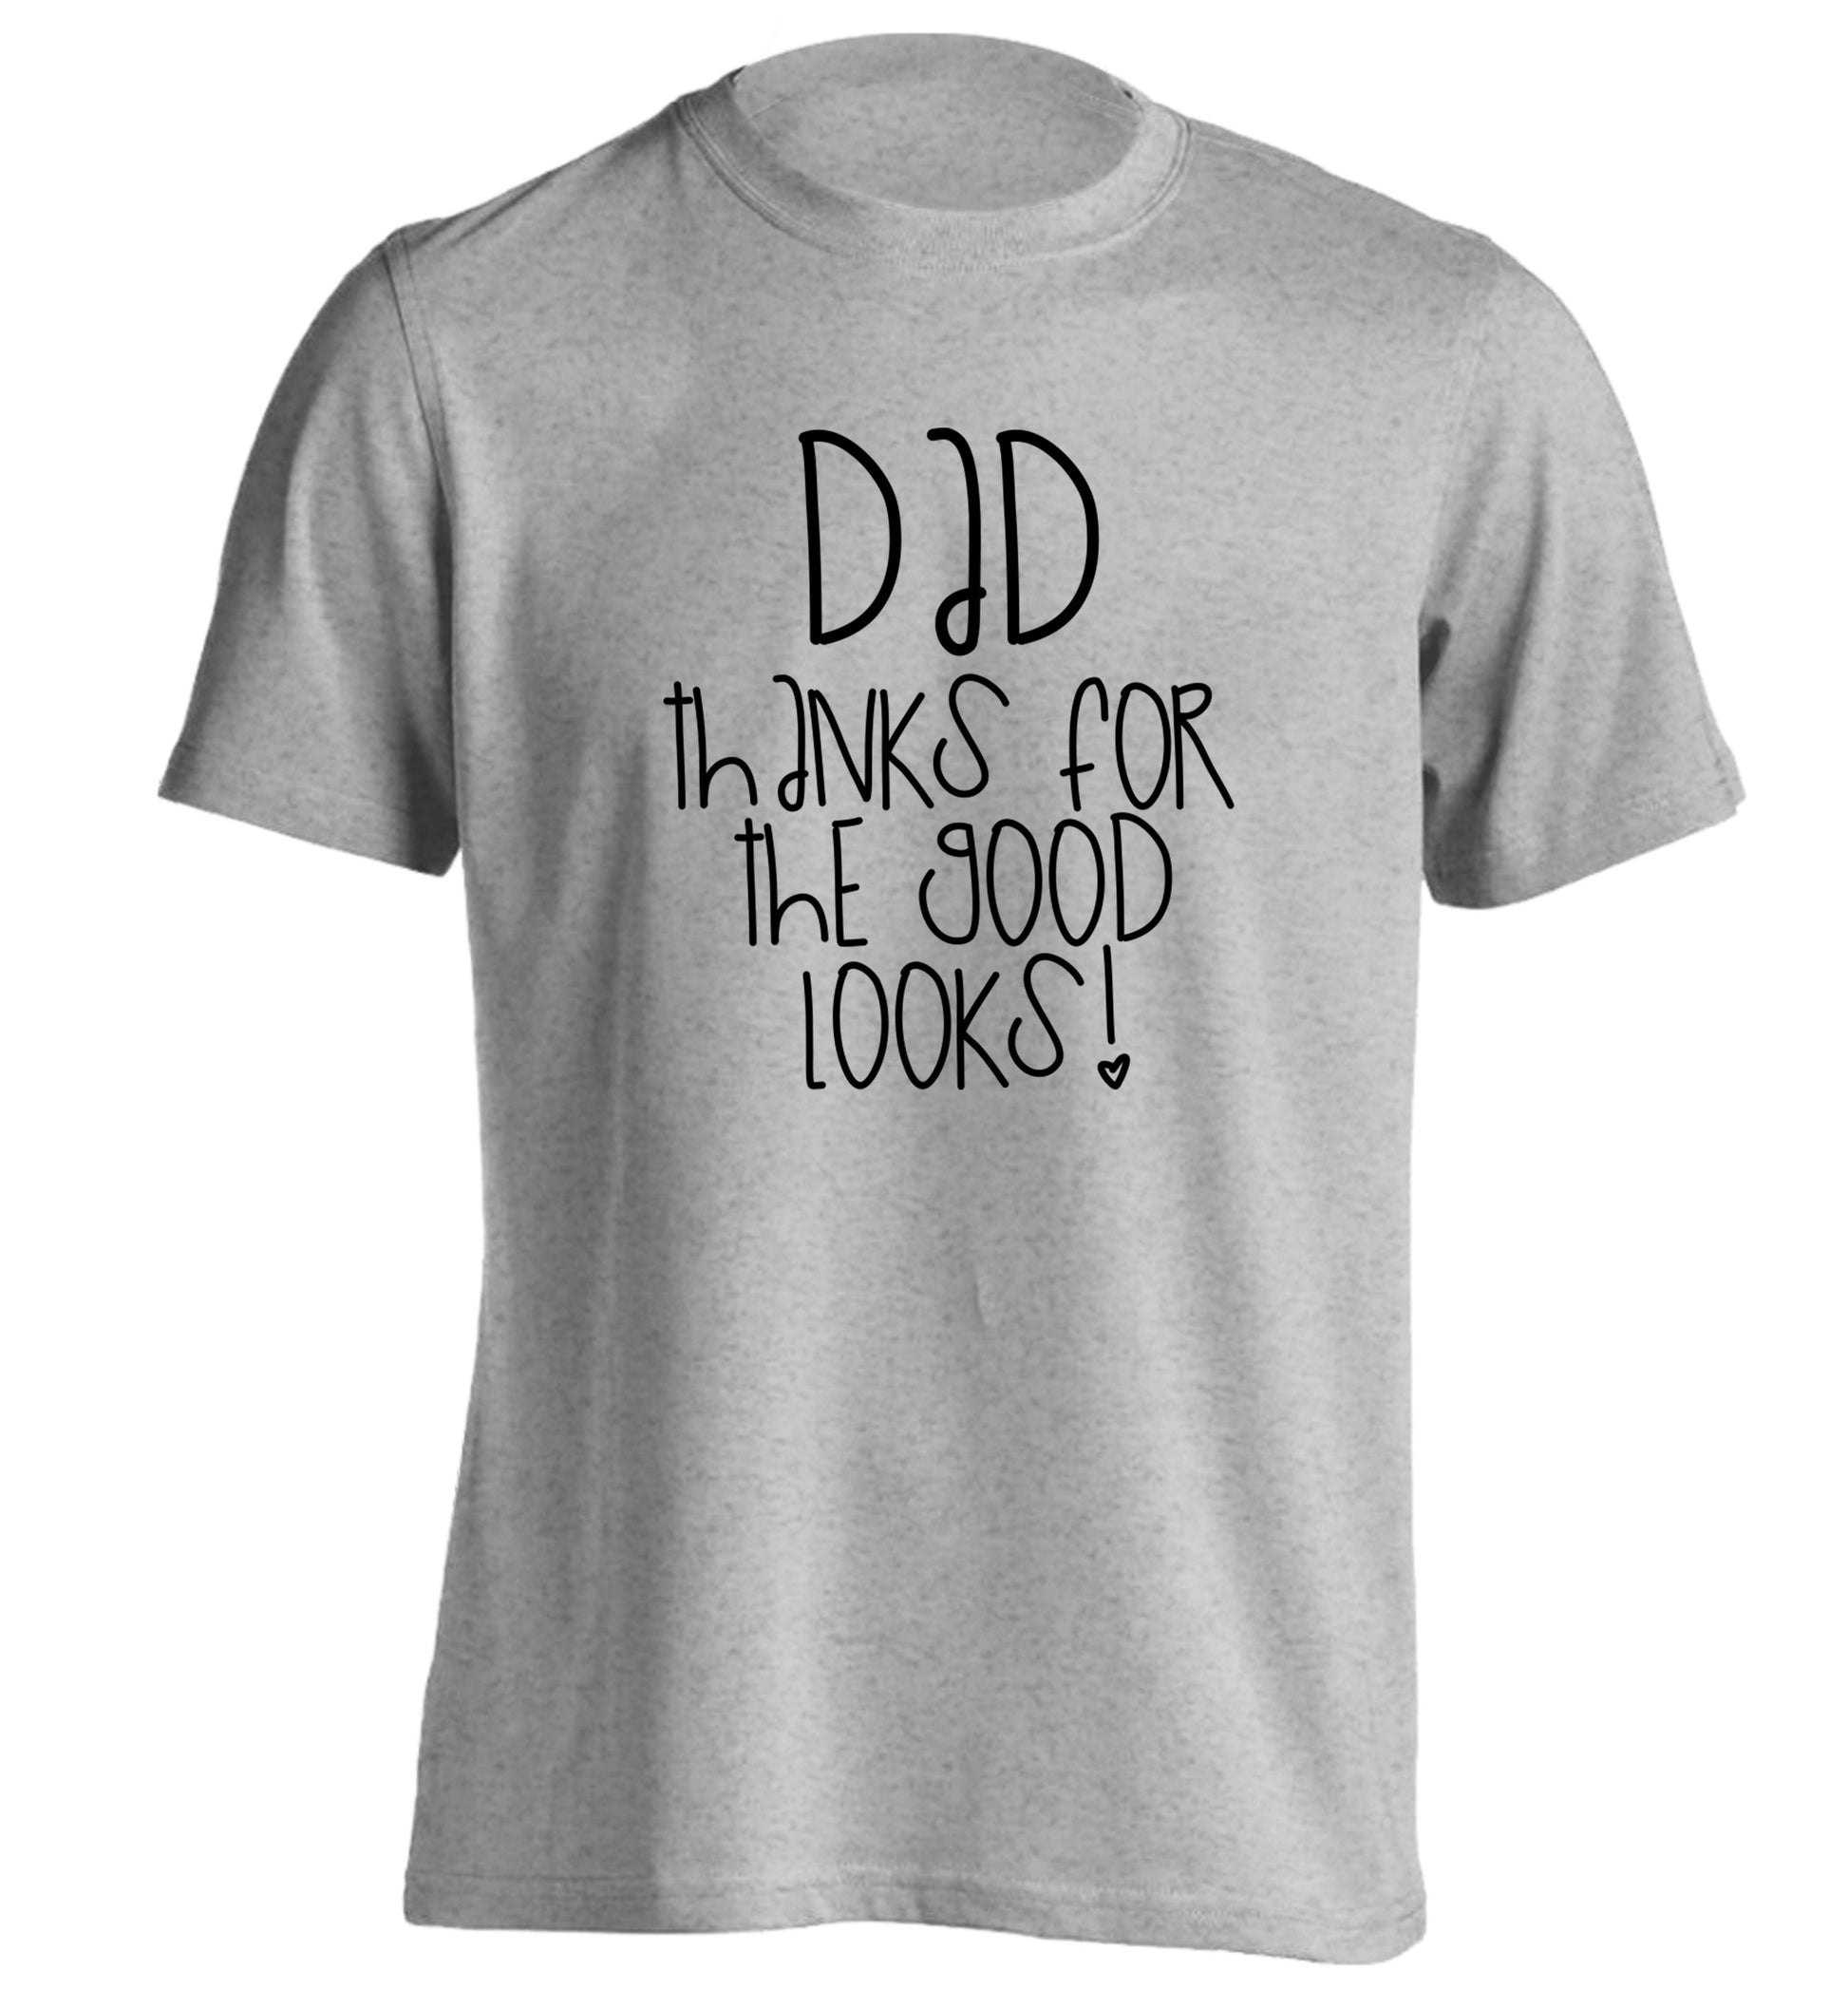 Dad thanks for the good looks adults unisex grey Tshirt 2XL